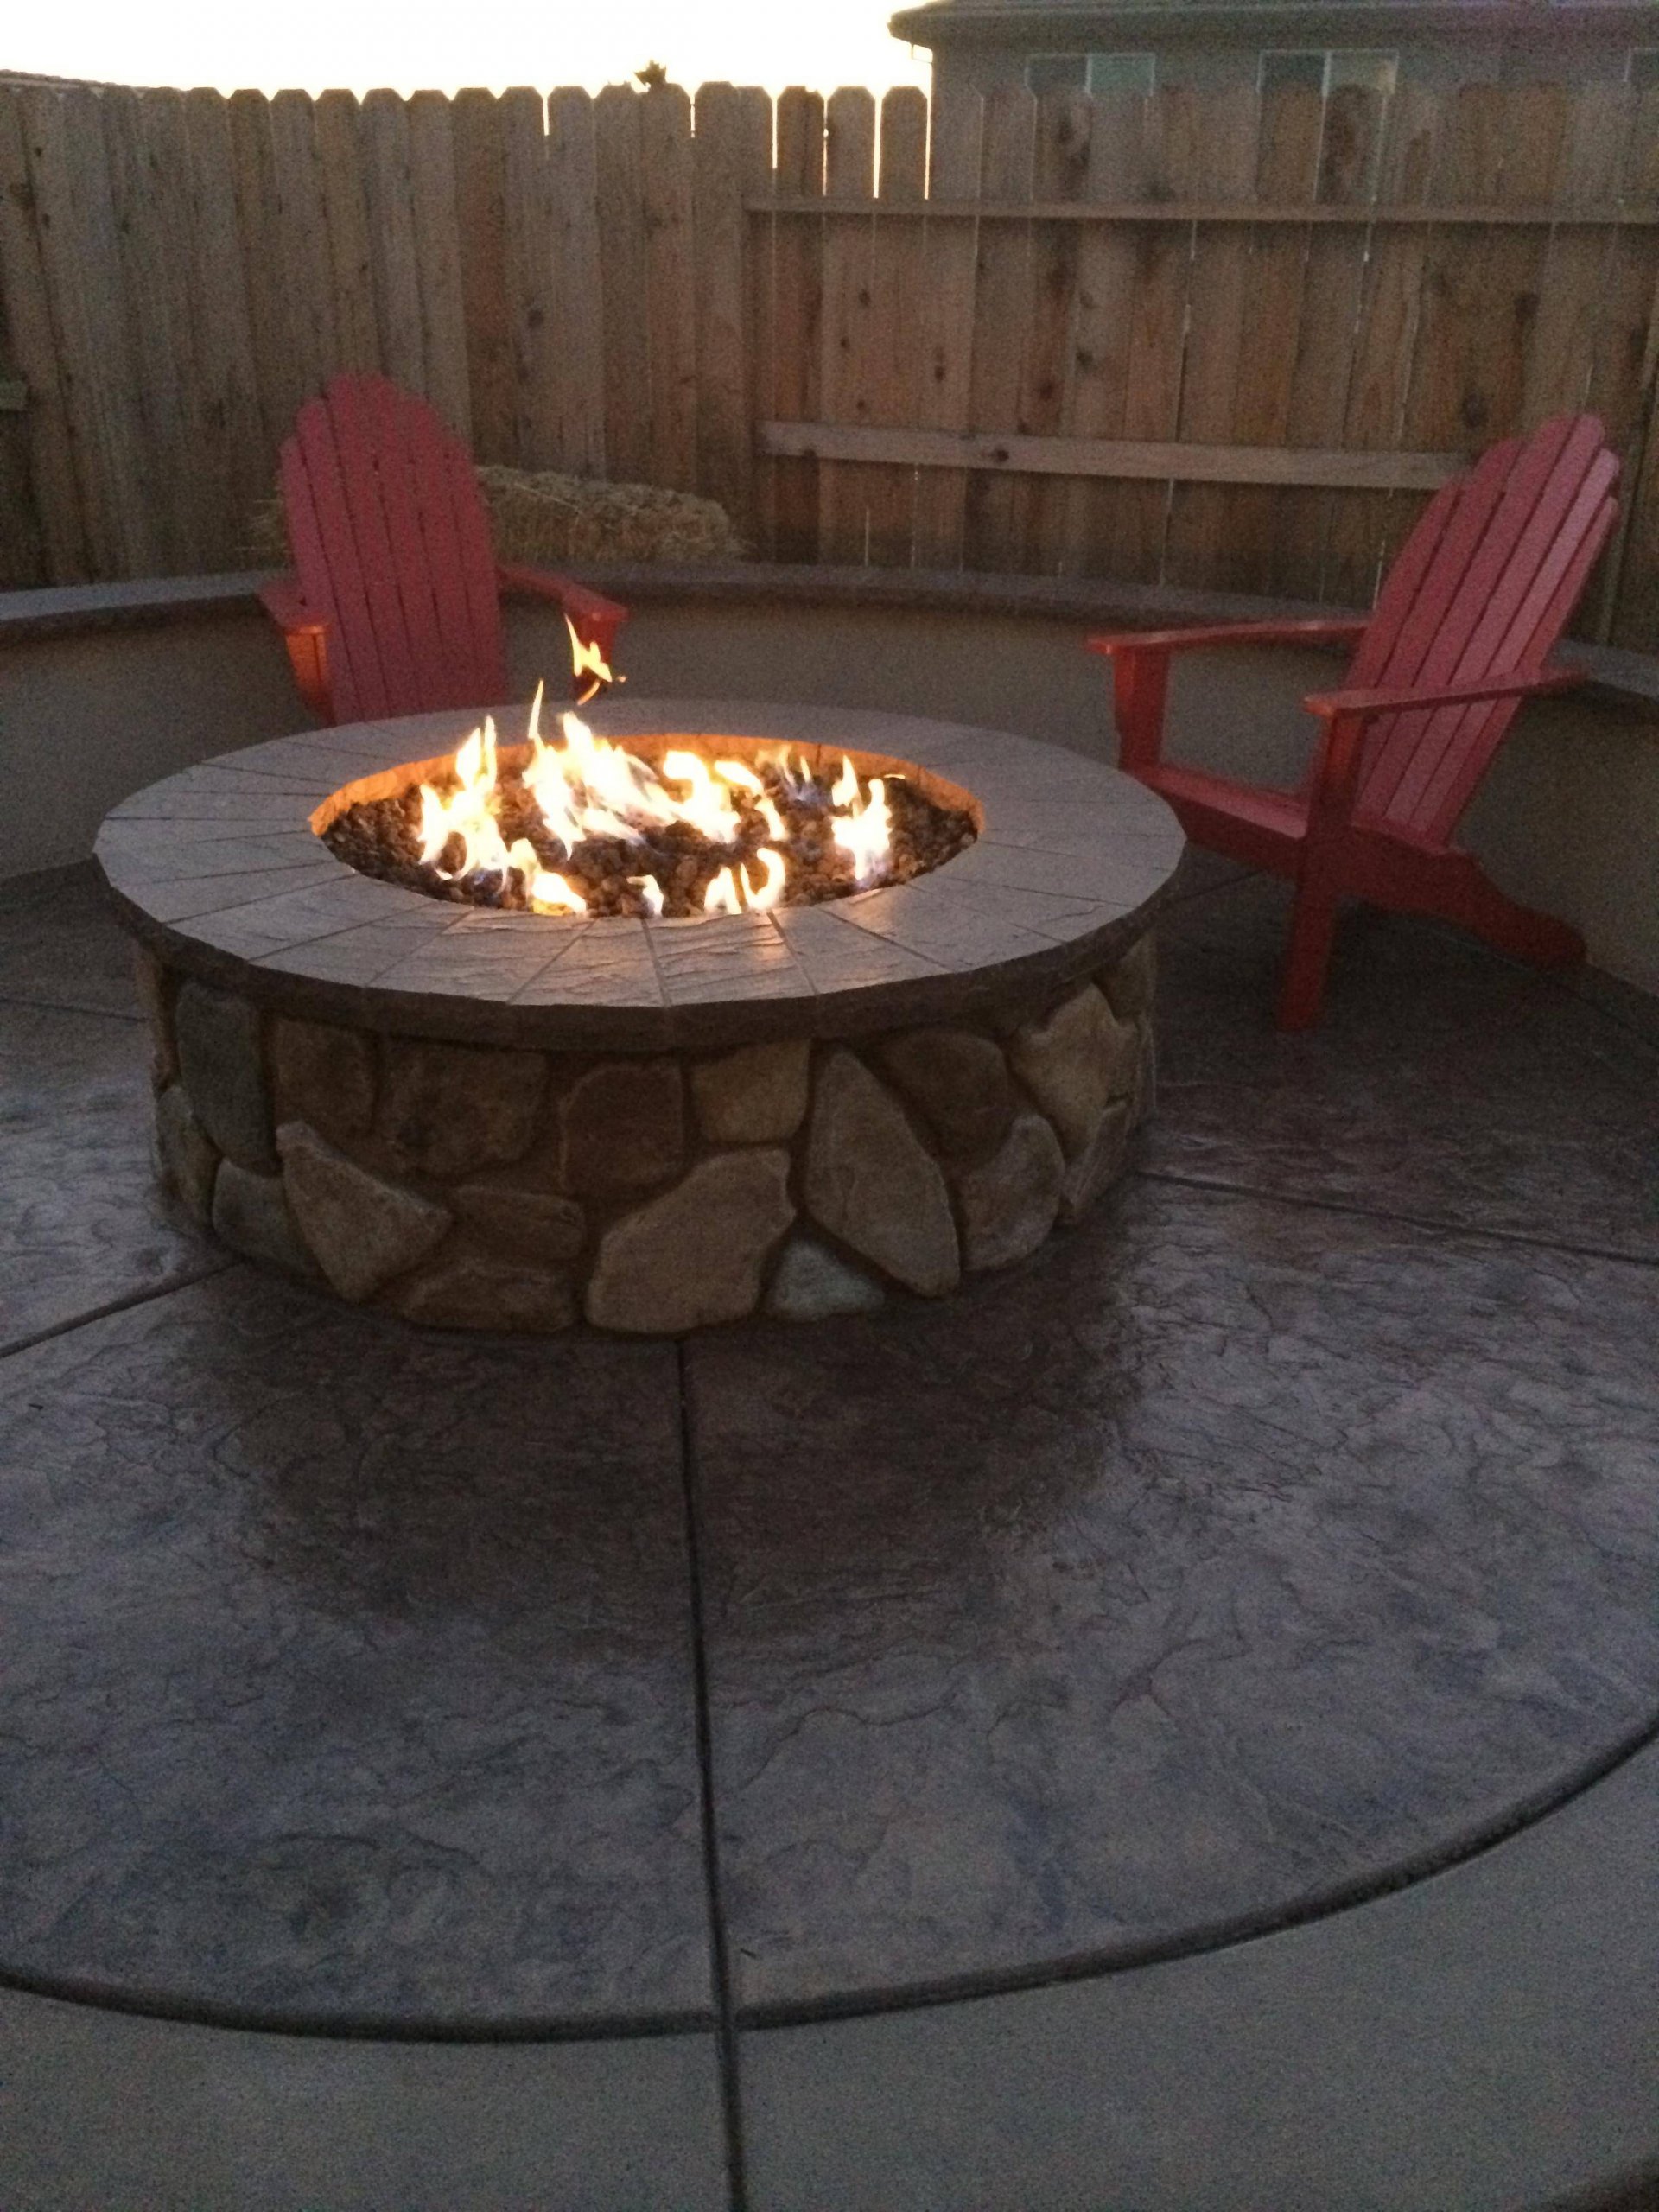 Fire Pit Ring Insert Ers Guide, Fire Ring Vs Fire Pit